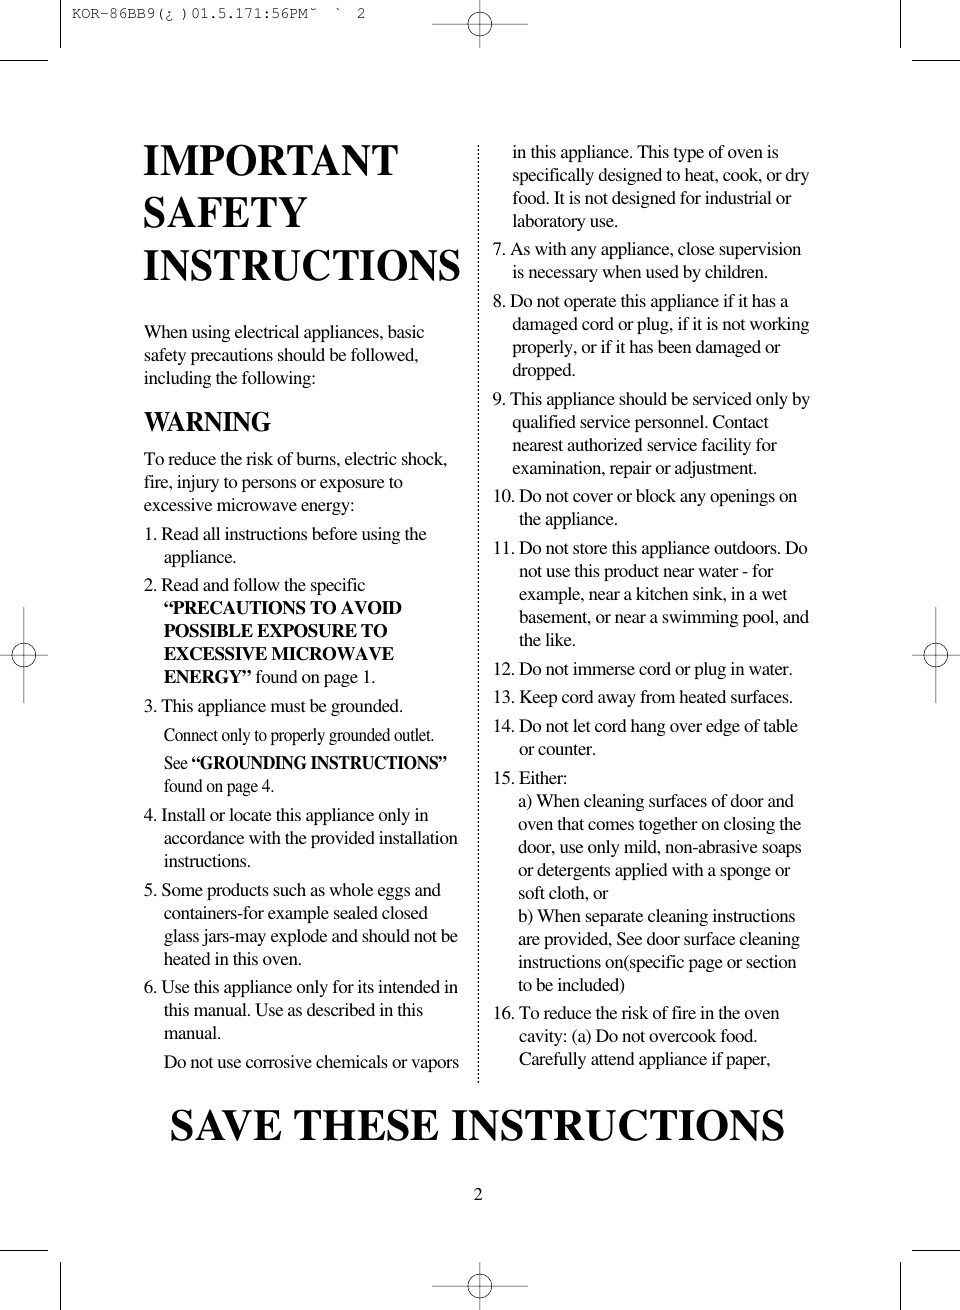 2When using electrical appliances, basicsafety precautions should be followed,including the following:WARNINGTo reduce the risk of burns, electric shock,fire, injury to persons or exposure toexcessive microwave energy:1. Read all instructions before using theappliance.2. Read and follow the specific“PRECAUTIONS TO AVOIDPOSSIBLE EXPOSURE TOEXCESSIVE MICROWAVEENERGY” found on page 1.3. This appliance must be grounded.Connect only to properly grounded outlet.See “GROUNDING INSTRUCTIONS”found on page 4.4. Install or locate this appliance only inaccordance with the provided installationinstructions.5. Some products such as whole eggs andcontainers-for example sealed closedglass jars-may explode and should not beheated in this oven.6. Use this appliance only for its intended inthis manual. Use as described in thismanual.Do not use corrosive chemicals or vaporsin this appliance. This type of oven isspecifically designed to heat, cook, or dryfood. It is not designed for industrial orlaboratory use.7. As with any appliance, close supervisionis necessary when used by children.8. Do not operate this appliance if it has adamaged cord or plug, if it is not workingproperly, or if it has been damaged ordropped.9. This appliance should be serviced only byqualified service personnel. Contactnearest authorized service facility forexamination, repair or adjustment.10. Do not cover or block any openings onthe appliance.11. Do not store this appliance outdoors. Donot use this product near water - forexample, near a kitchen sink, in a wetbasement, or near a swimming pool, andthe like.12. Do not immerse cord or plug in water.13. Keep cord away from heated surfaces.14. Do not let cord hang over edge of tableor counter.15. Either:a) When cleaning surfaces of door andoven that comes together on closing thedoor, use only mild, non-abrasive soapsor detergents applied with a sponge orsoft cloth, orb) When separate cleaning instructionsare provided, See door surface cleaninginstructions on(specific page or sectionto be included)16. To reduce the risk of fire in the ovencavity: (a) Do not overcook food.Carefully attend appliance if paper, IMPORTANTSAFETYINSTRUCTIONSSAVE THESE INSTRUCTIONS KOR-86BB9(¿)  01.5.17 1:56 PM  ˘`2